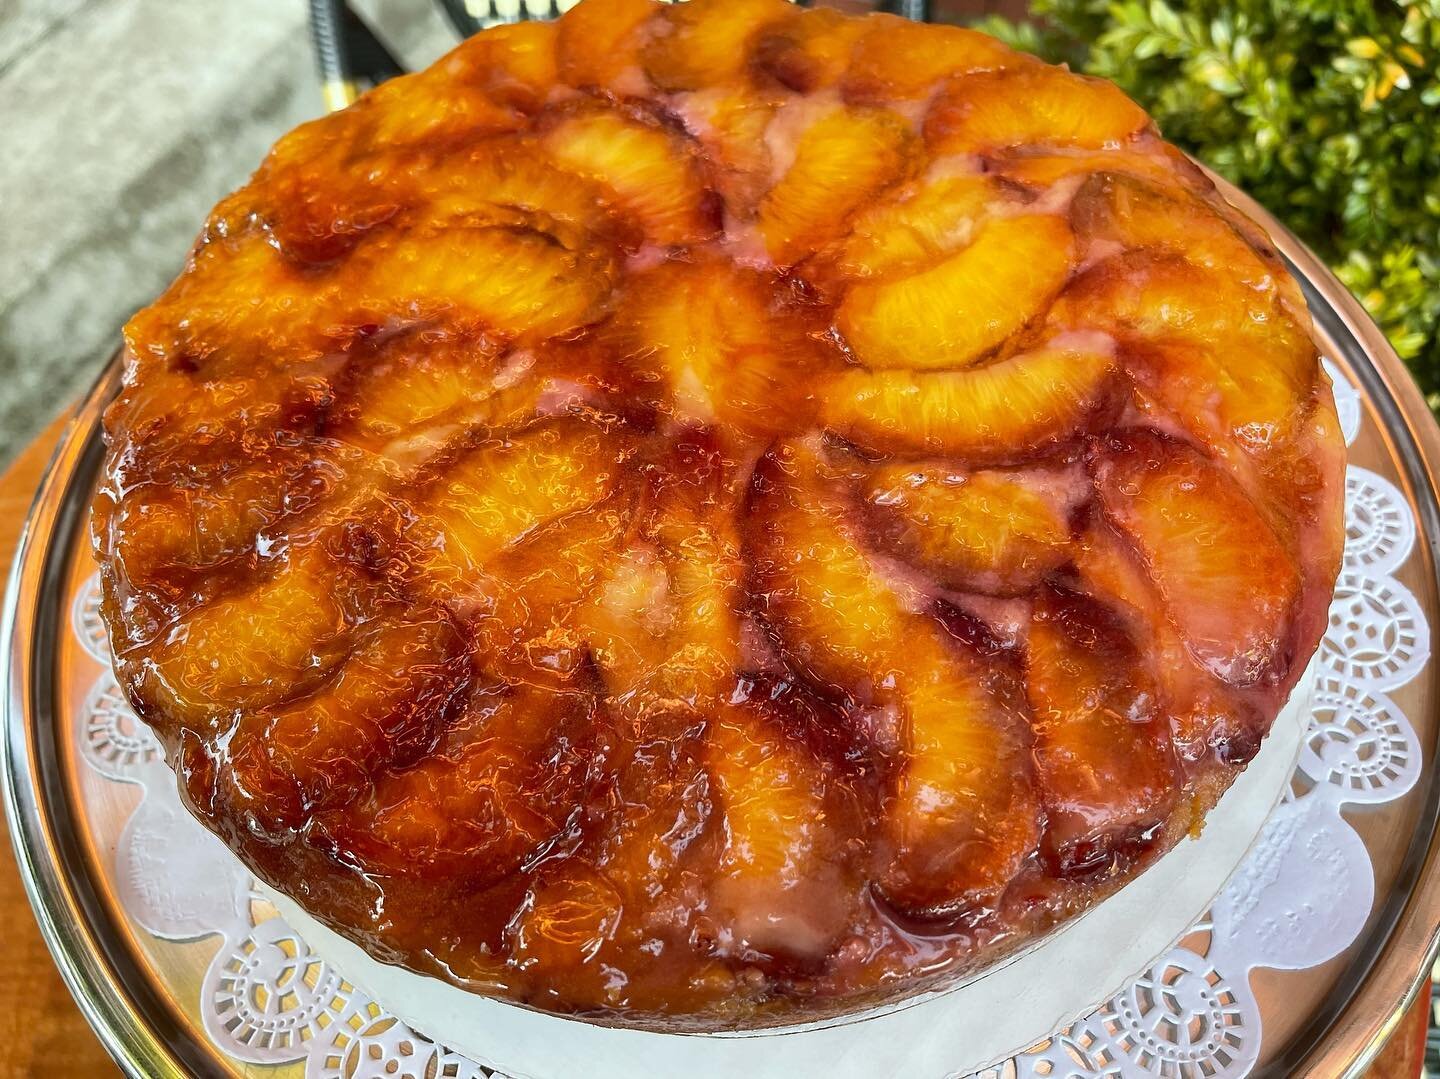 This week at Iron Rooster-
Upside Down Plum Cake